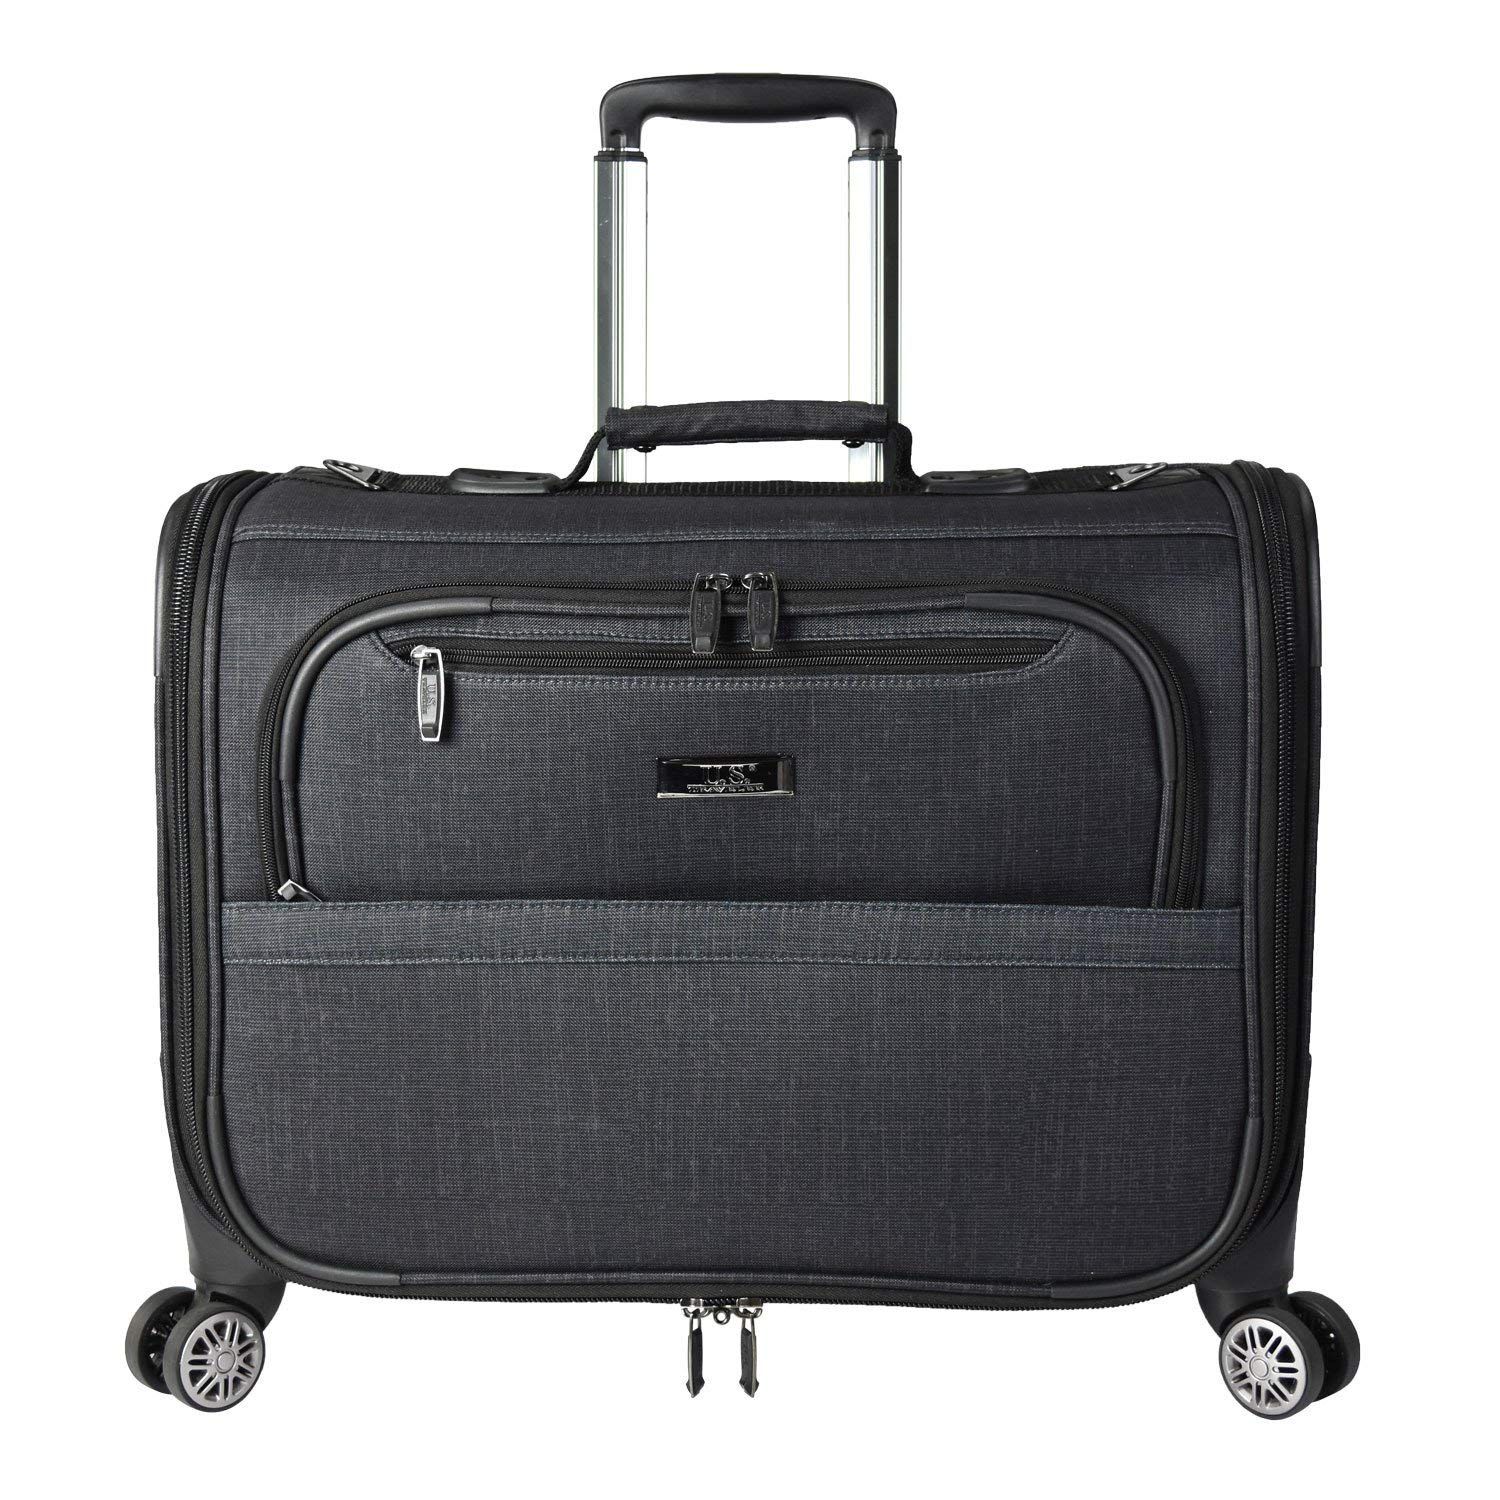 25 Garment Bag Carry-Ons to Keep Clothes Wrinkle-Free | Who What Wear